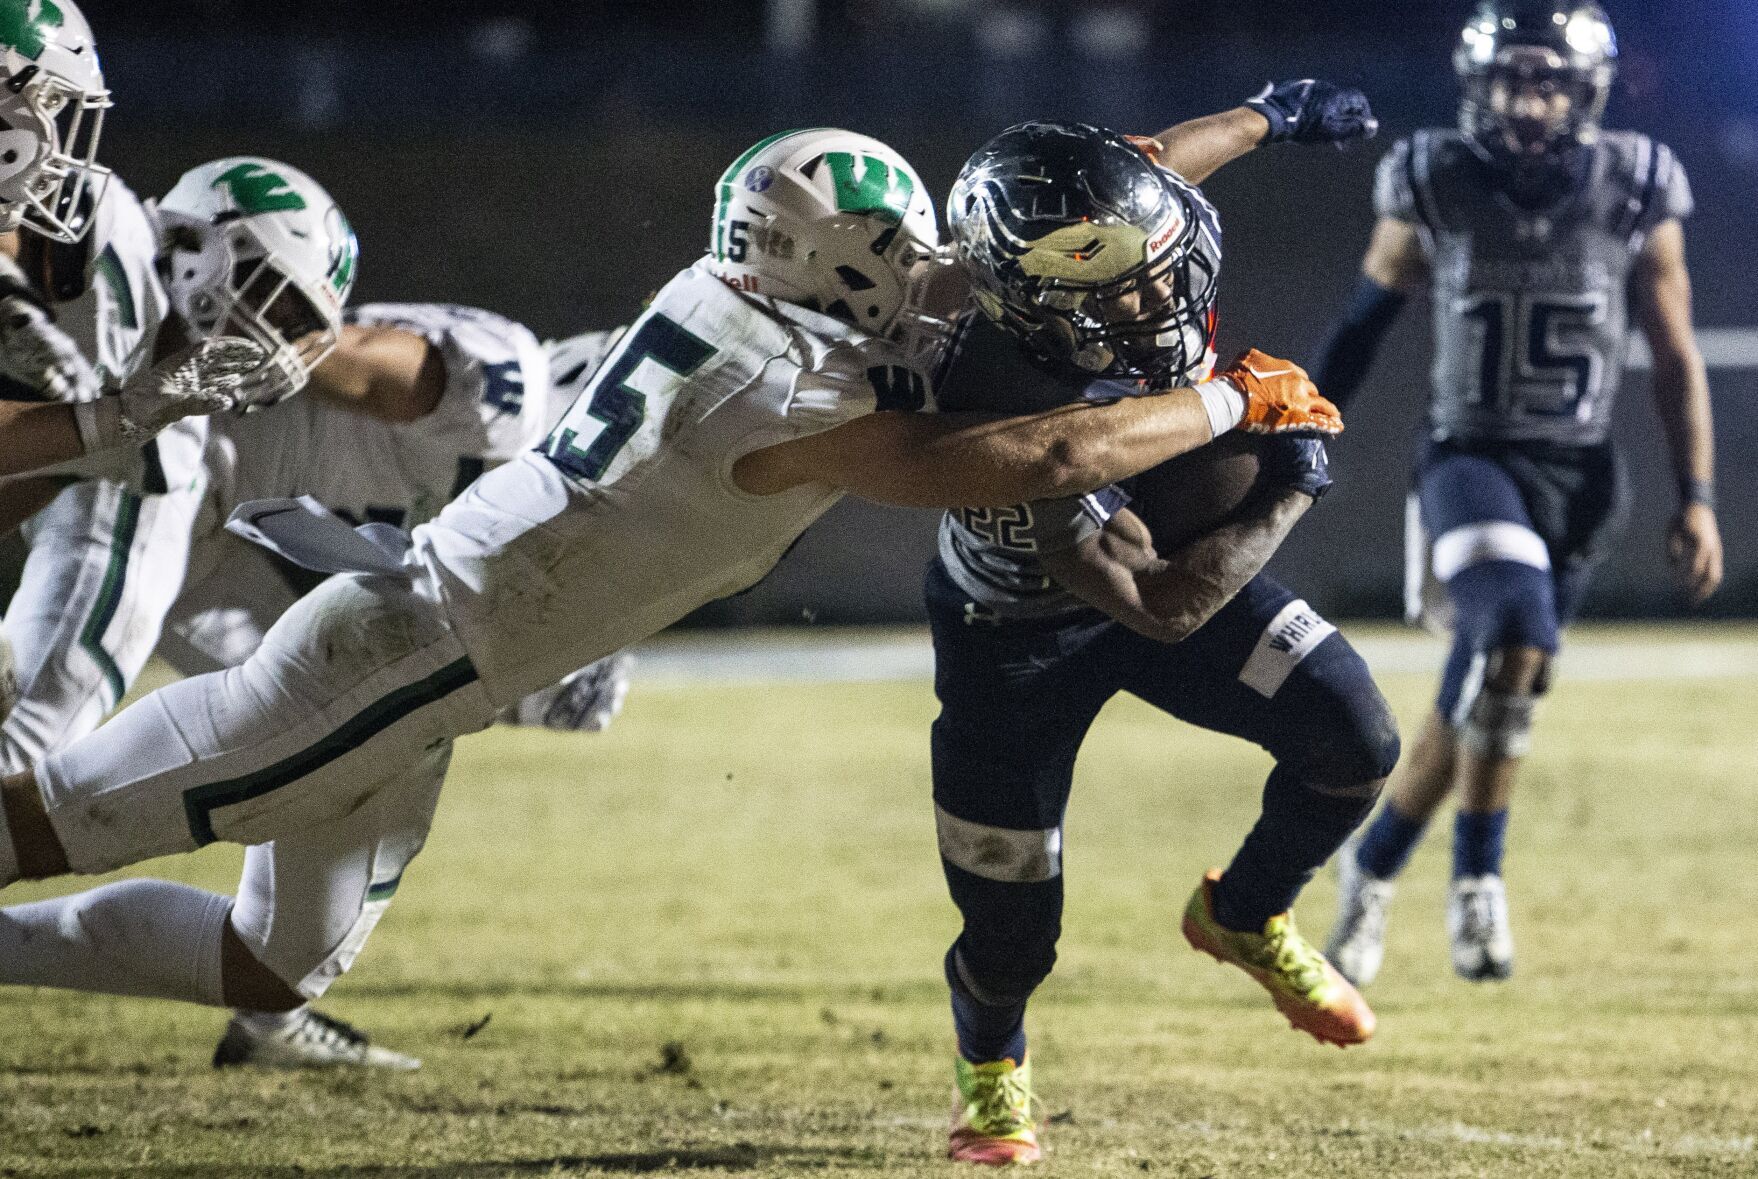 Grimsley and Dudley Face Tough Fourth Round Matchups in NCHSAA Playoffs